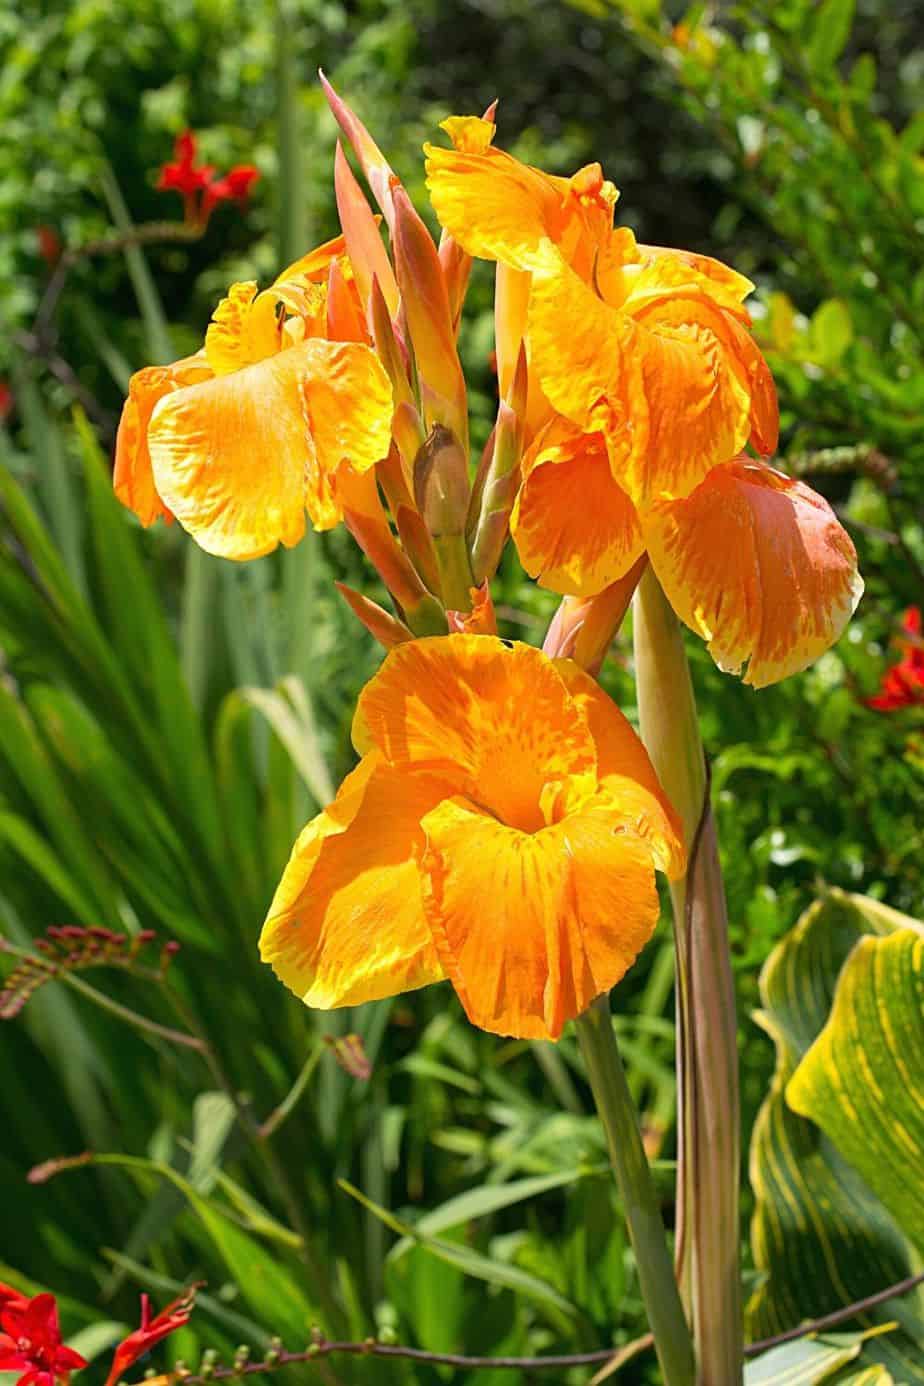 Canna Lily has thick, colorful blooms that can be grown as a great plant for privacy